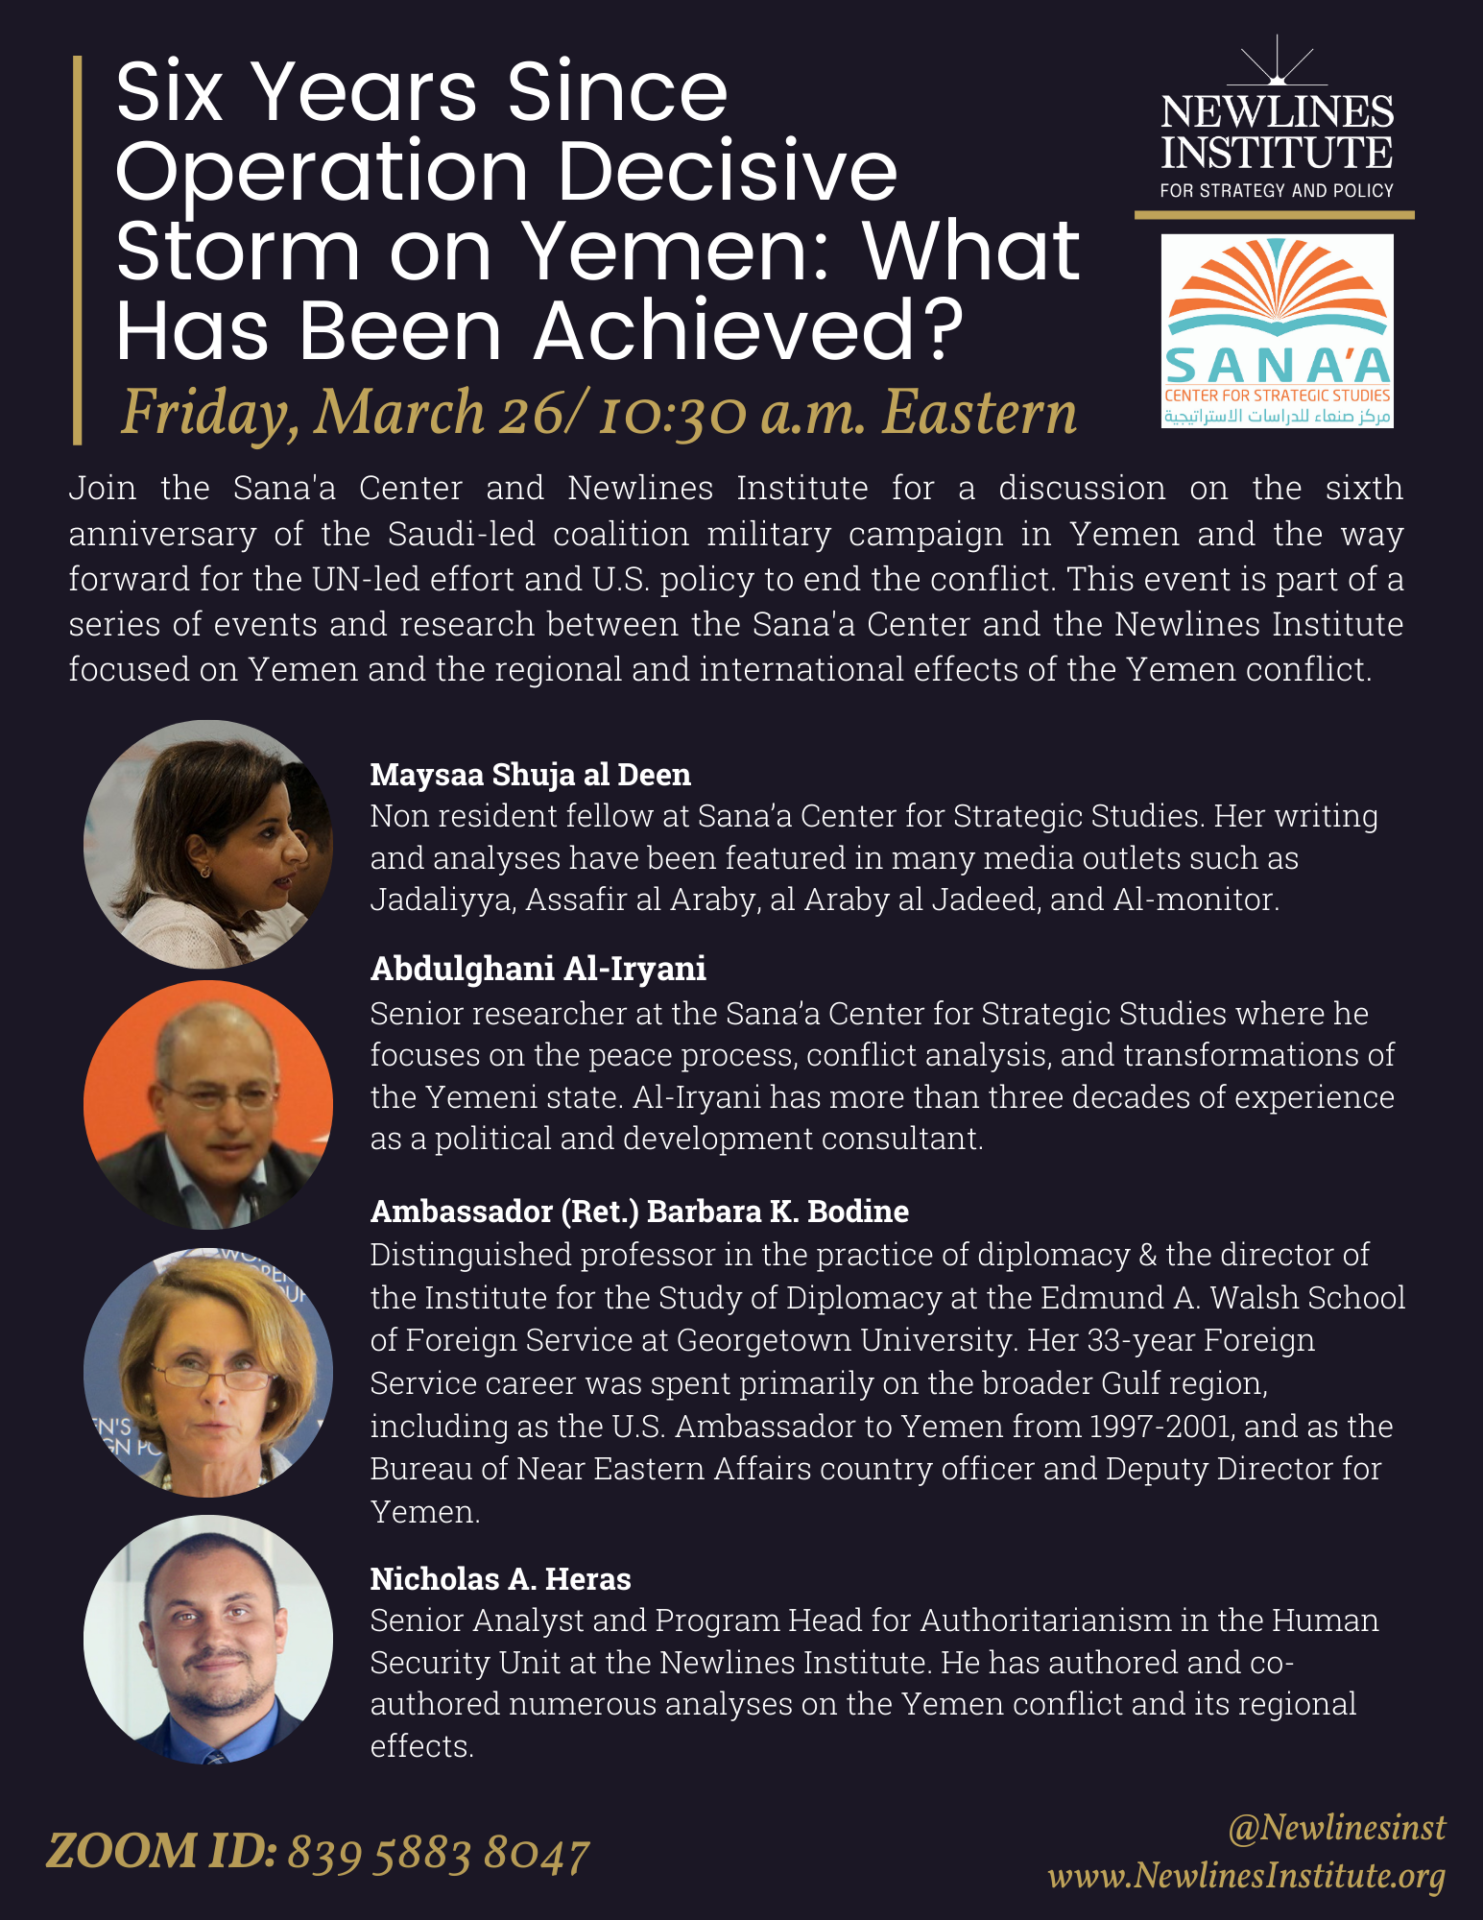 Six Years Since Operation Decisive Storm on Yemen: What Has Been Achieved?